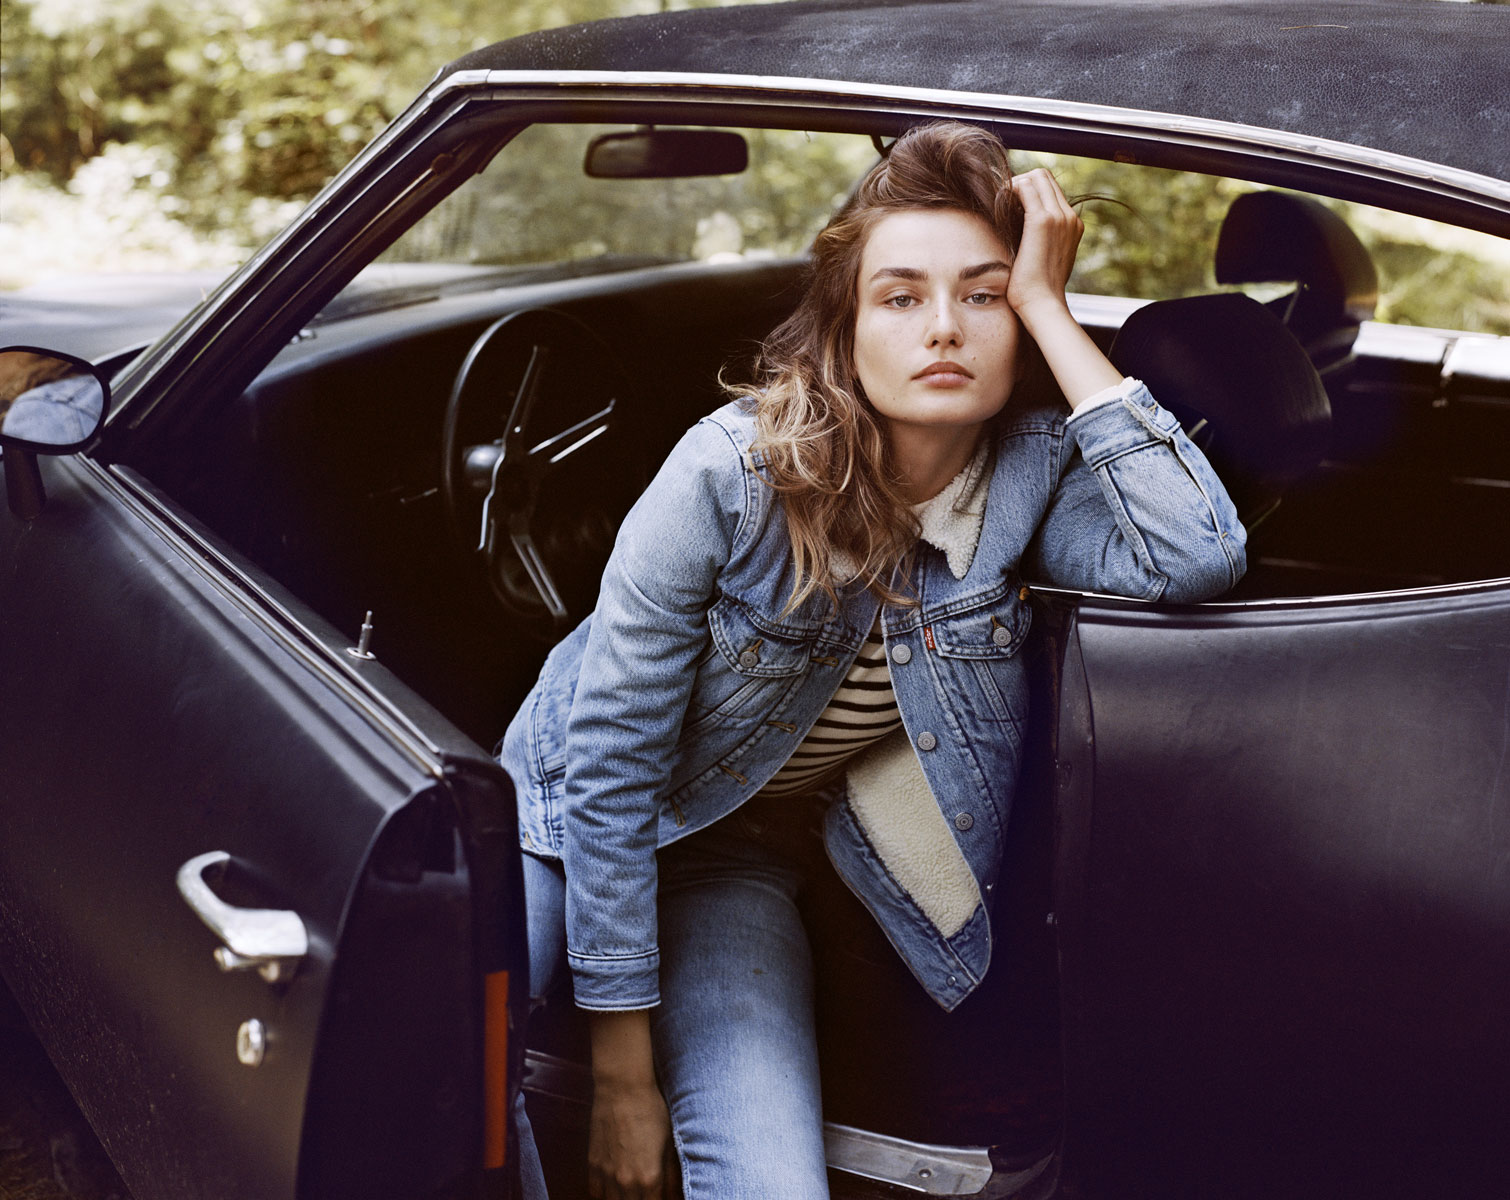 04-Andreea Diaconu by Dan Martensen for Telegraph-This Is Glamorous